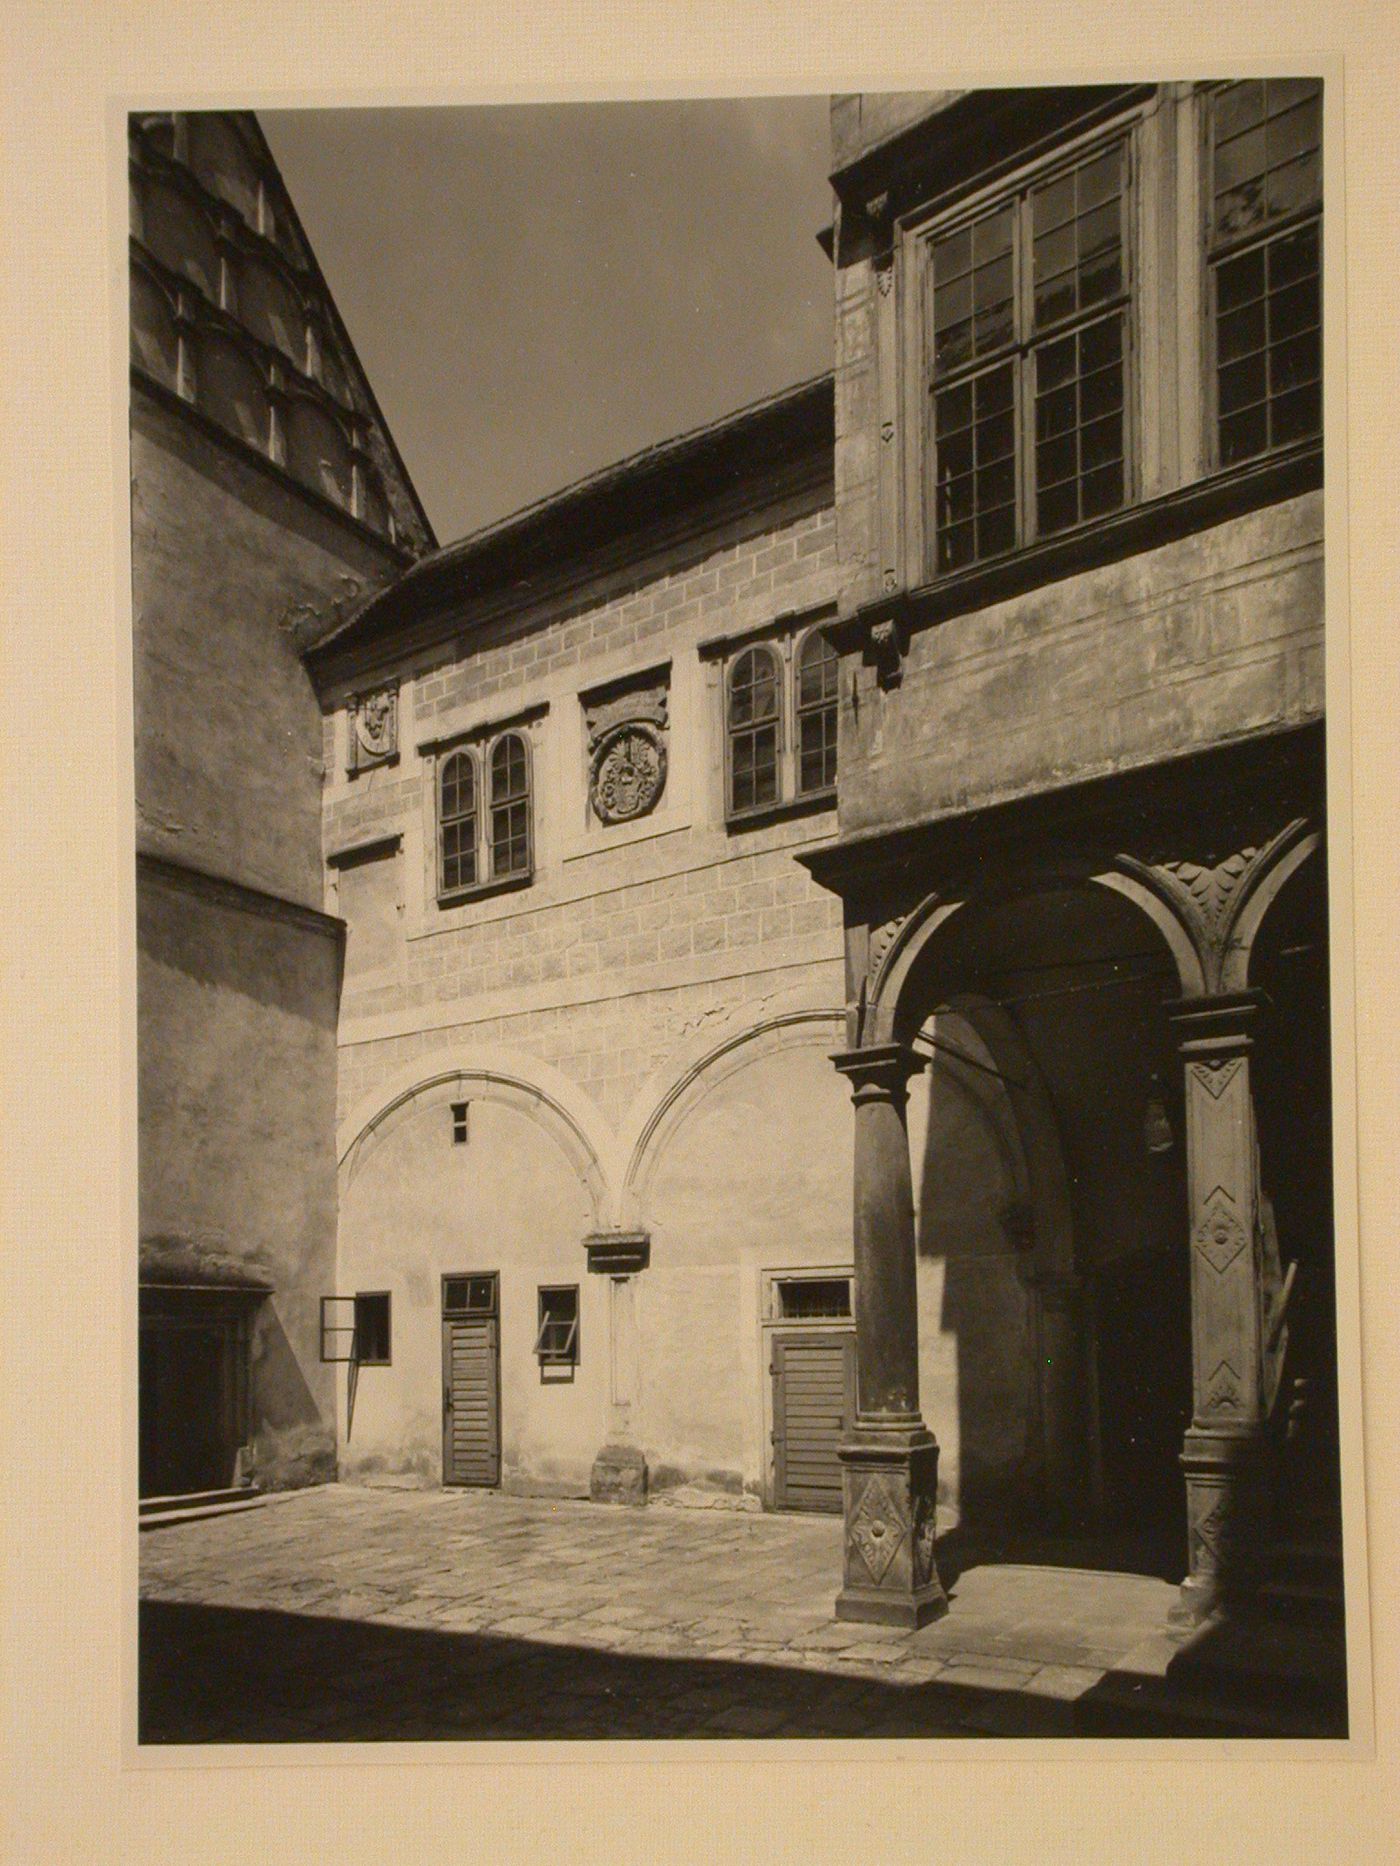 View of a courtyard showing a building façade with windows and panels with relief carvings, possibly in the Telc Château, Telc, Czechoslovakia (now Czech Republic)